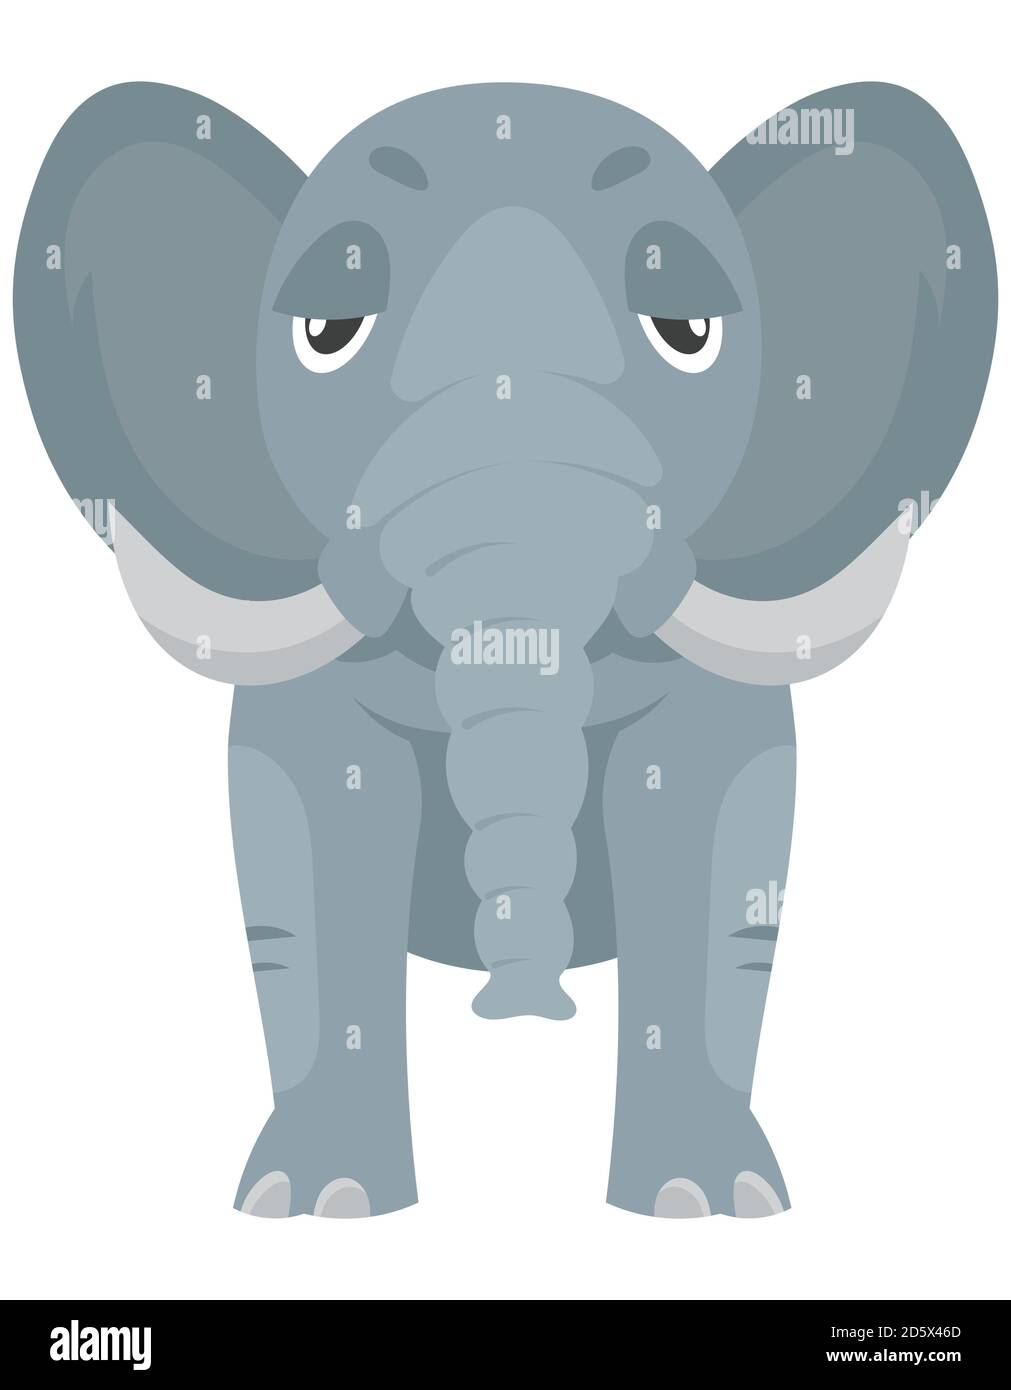 Standing elephant front view. African animal in cartoon style. Stock Vector